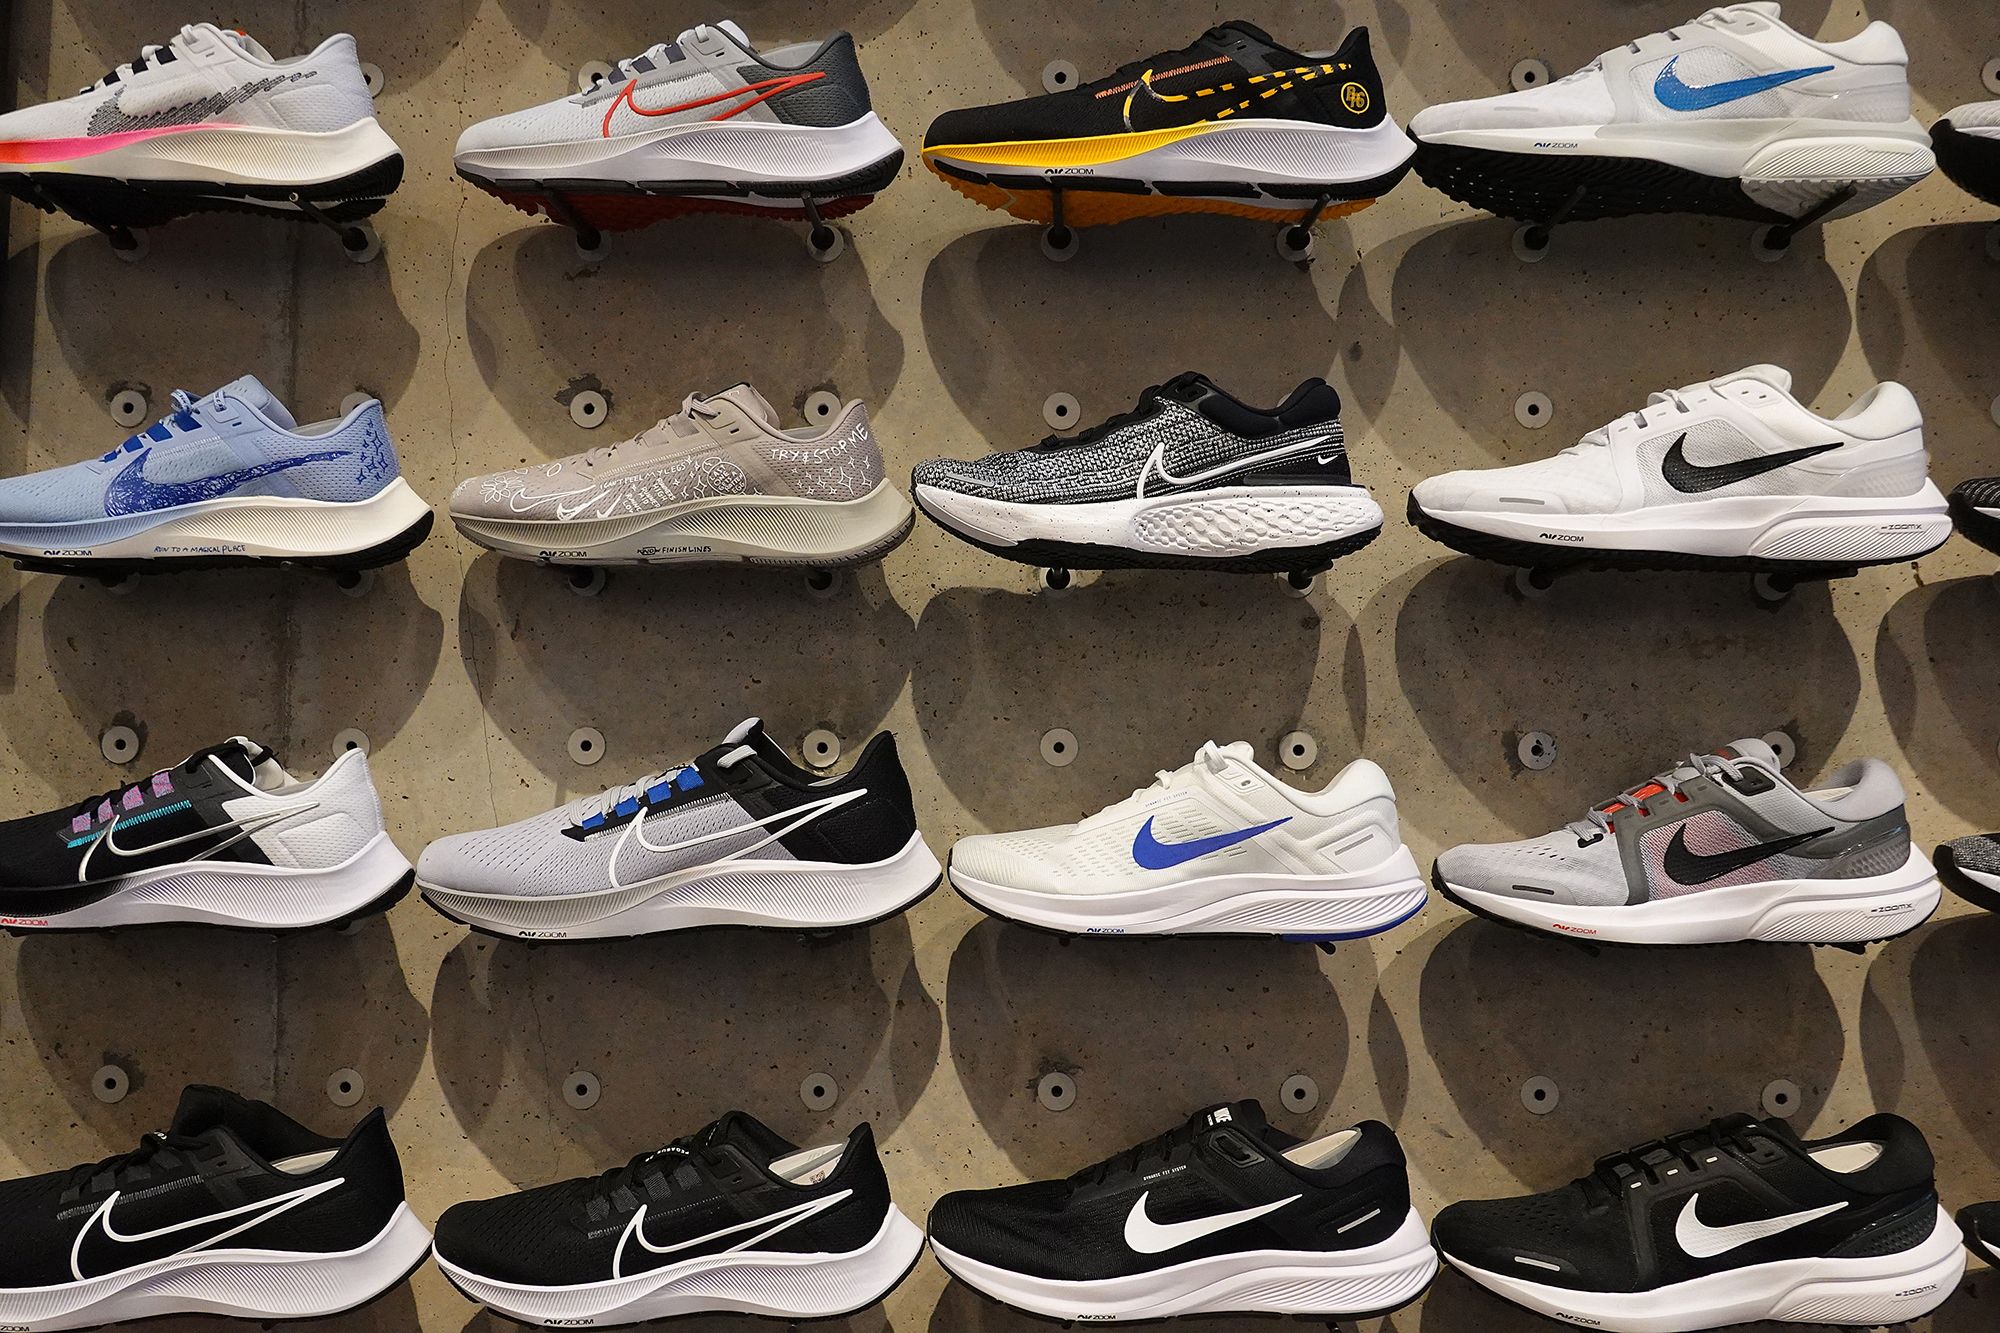 Nike going on sale, and its stock is plunging | Business